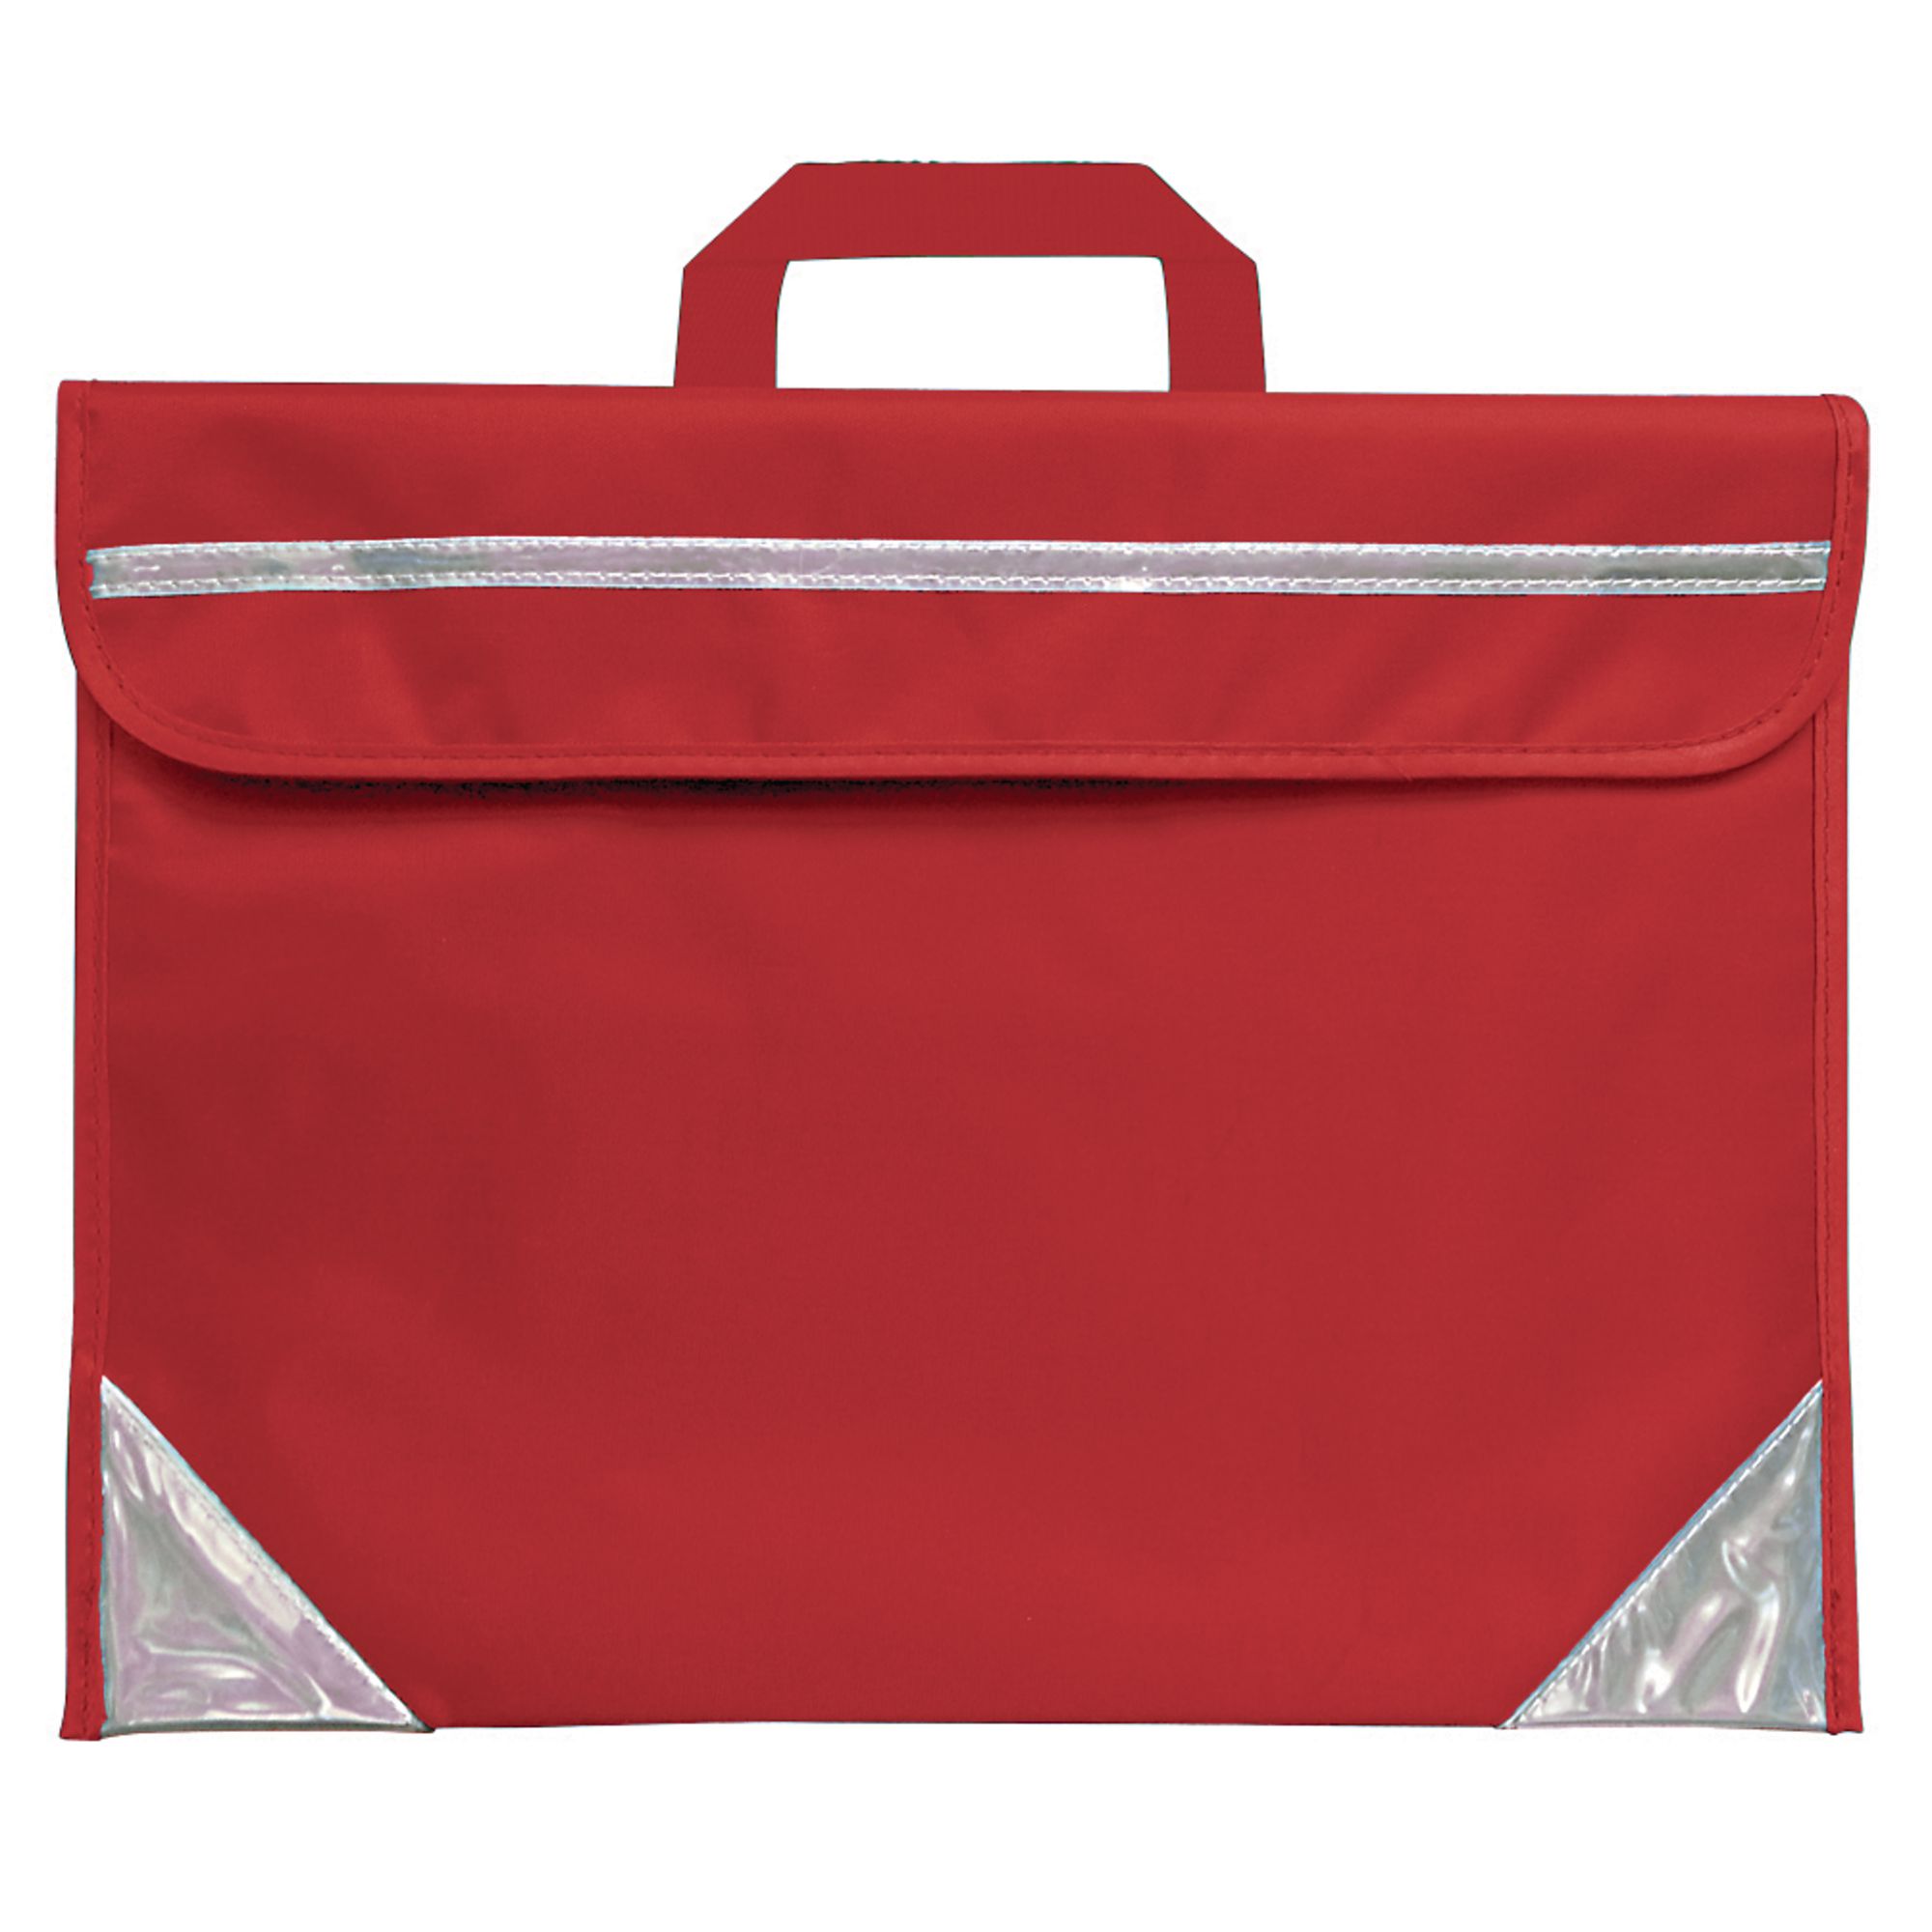 G1319147C - Duo Book Bag Red - Pack of 25 | GLS Educational Supplies